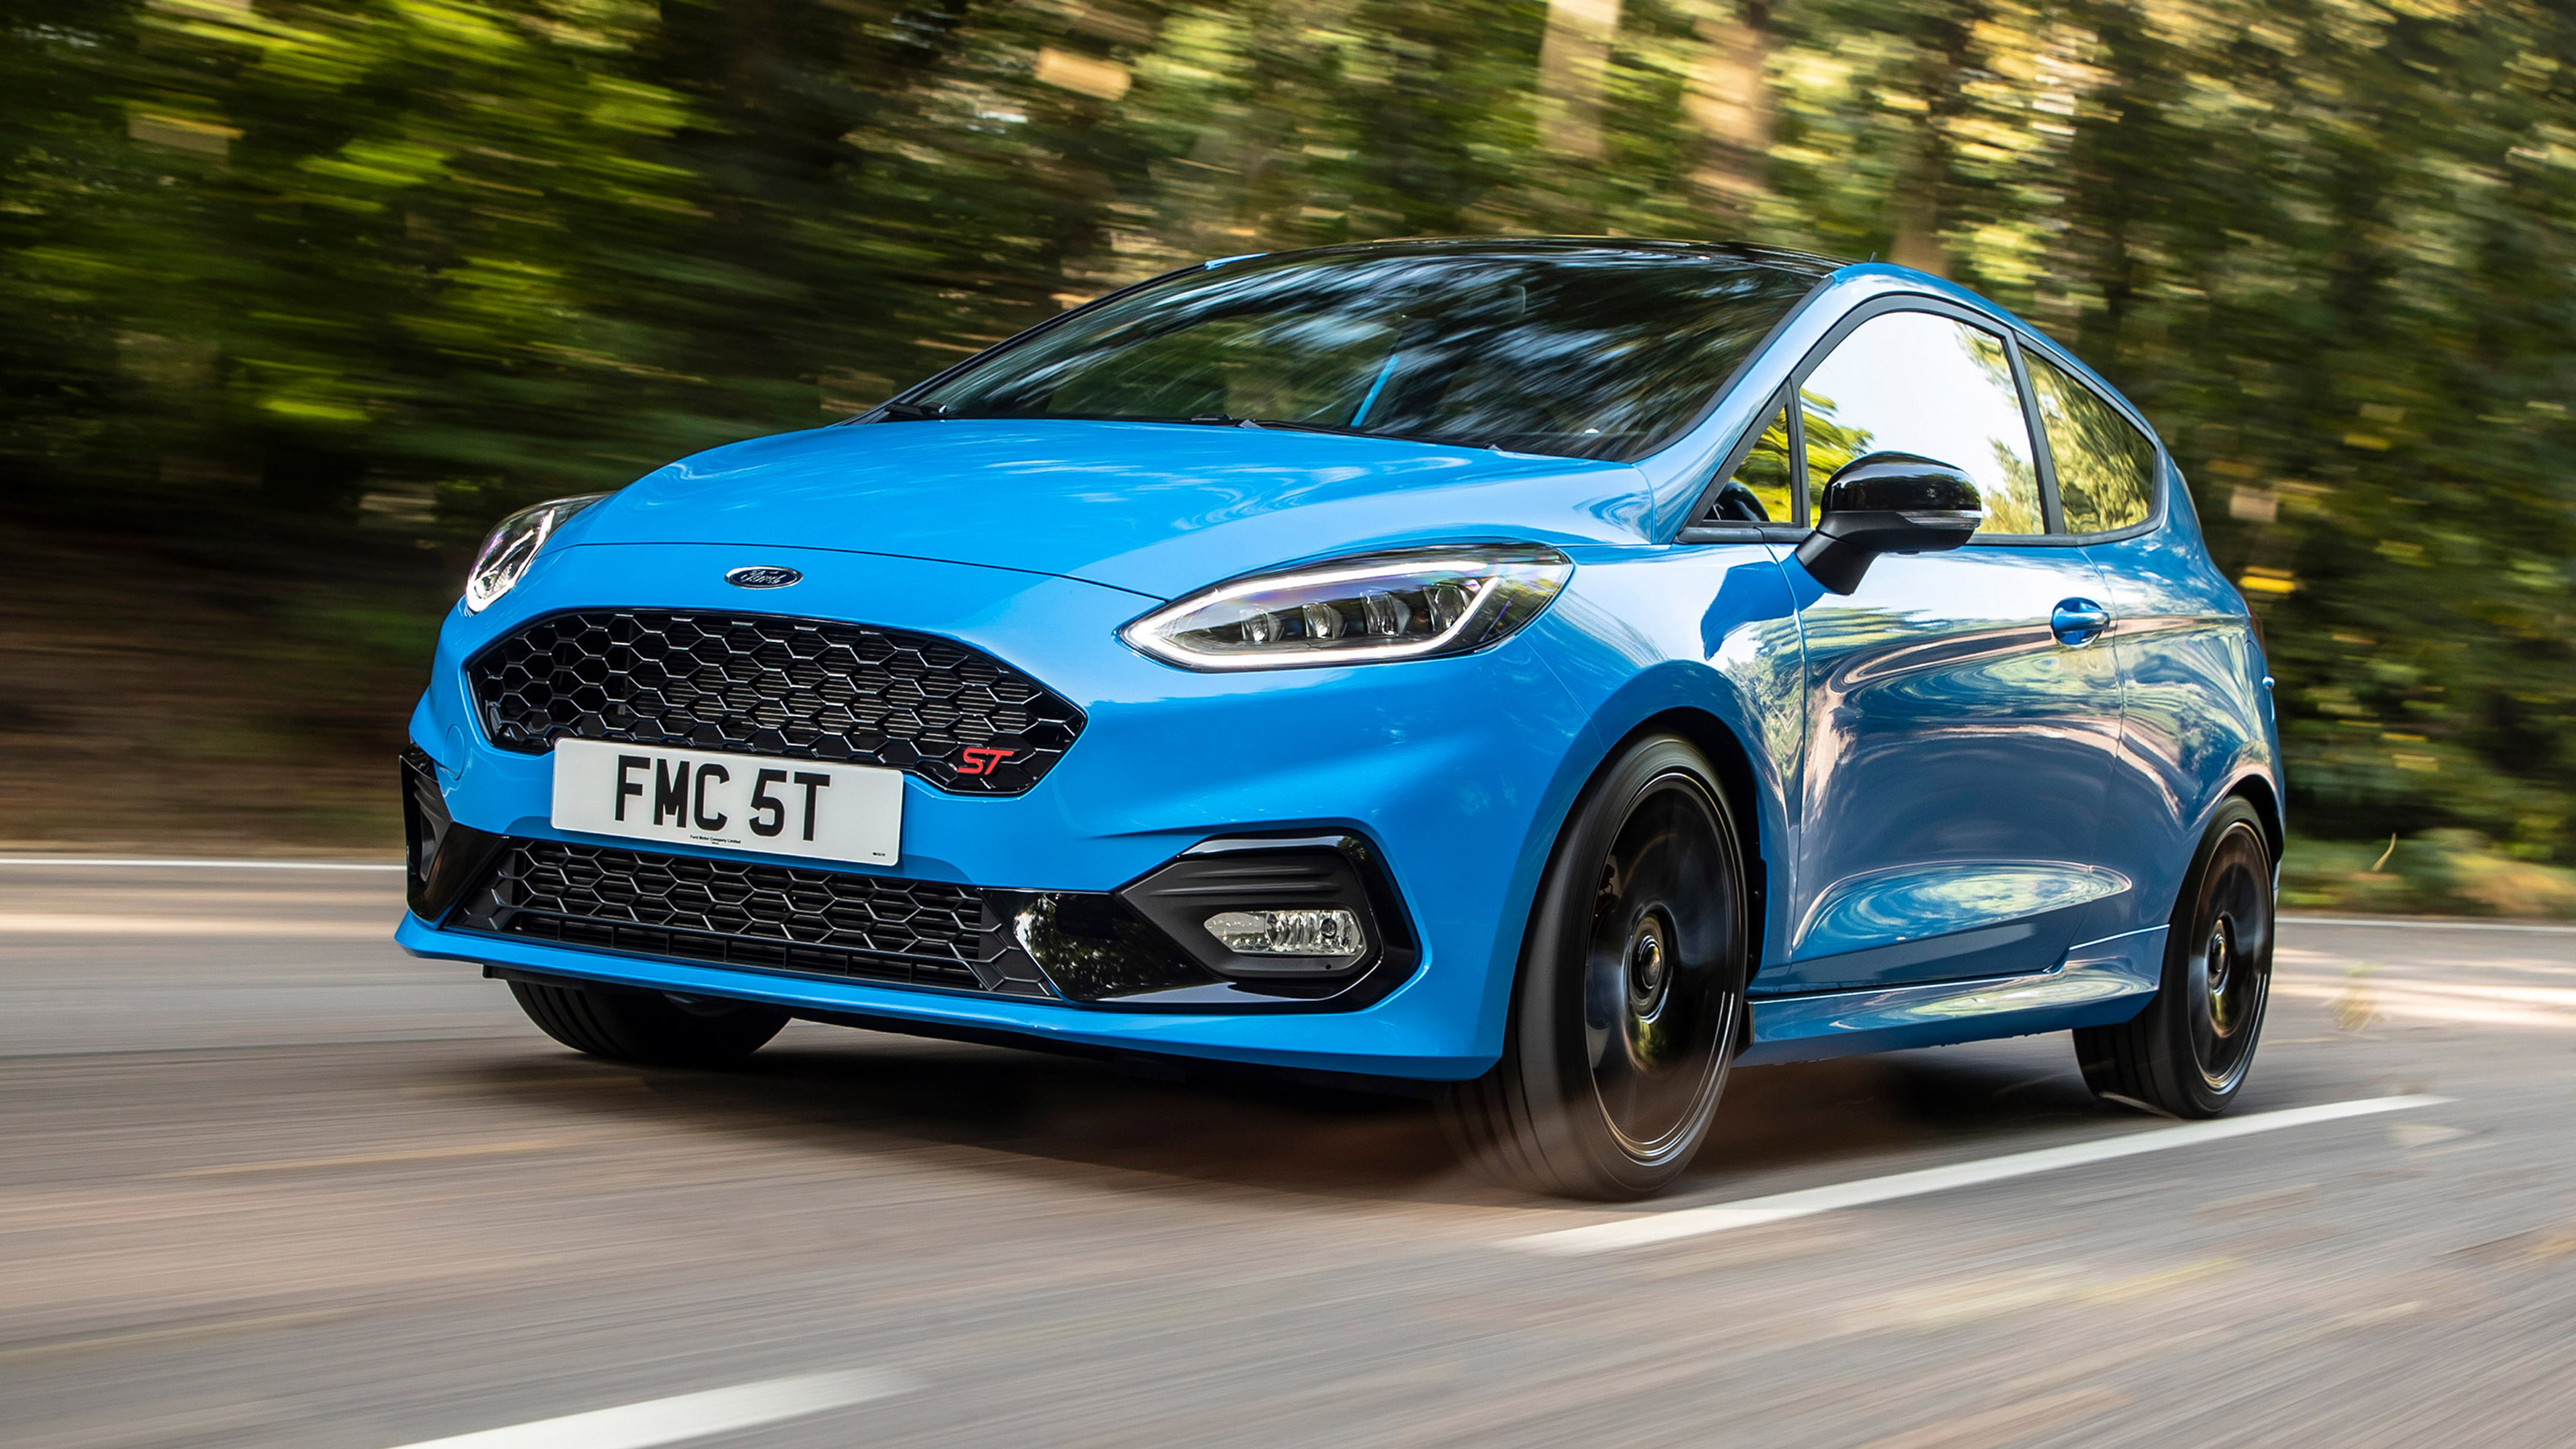 Ford Fiesta ST (2022) review: still got it after all these doors